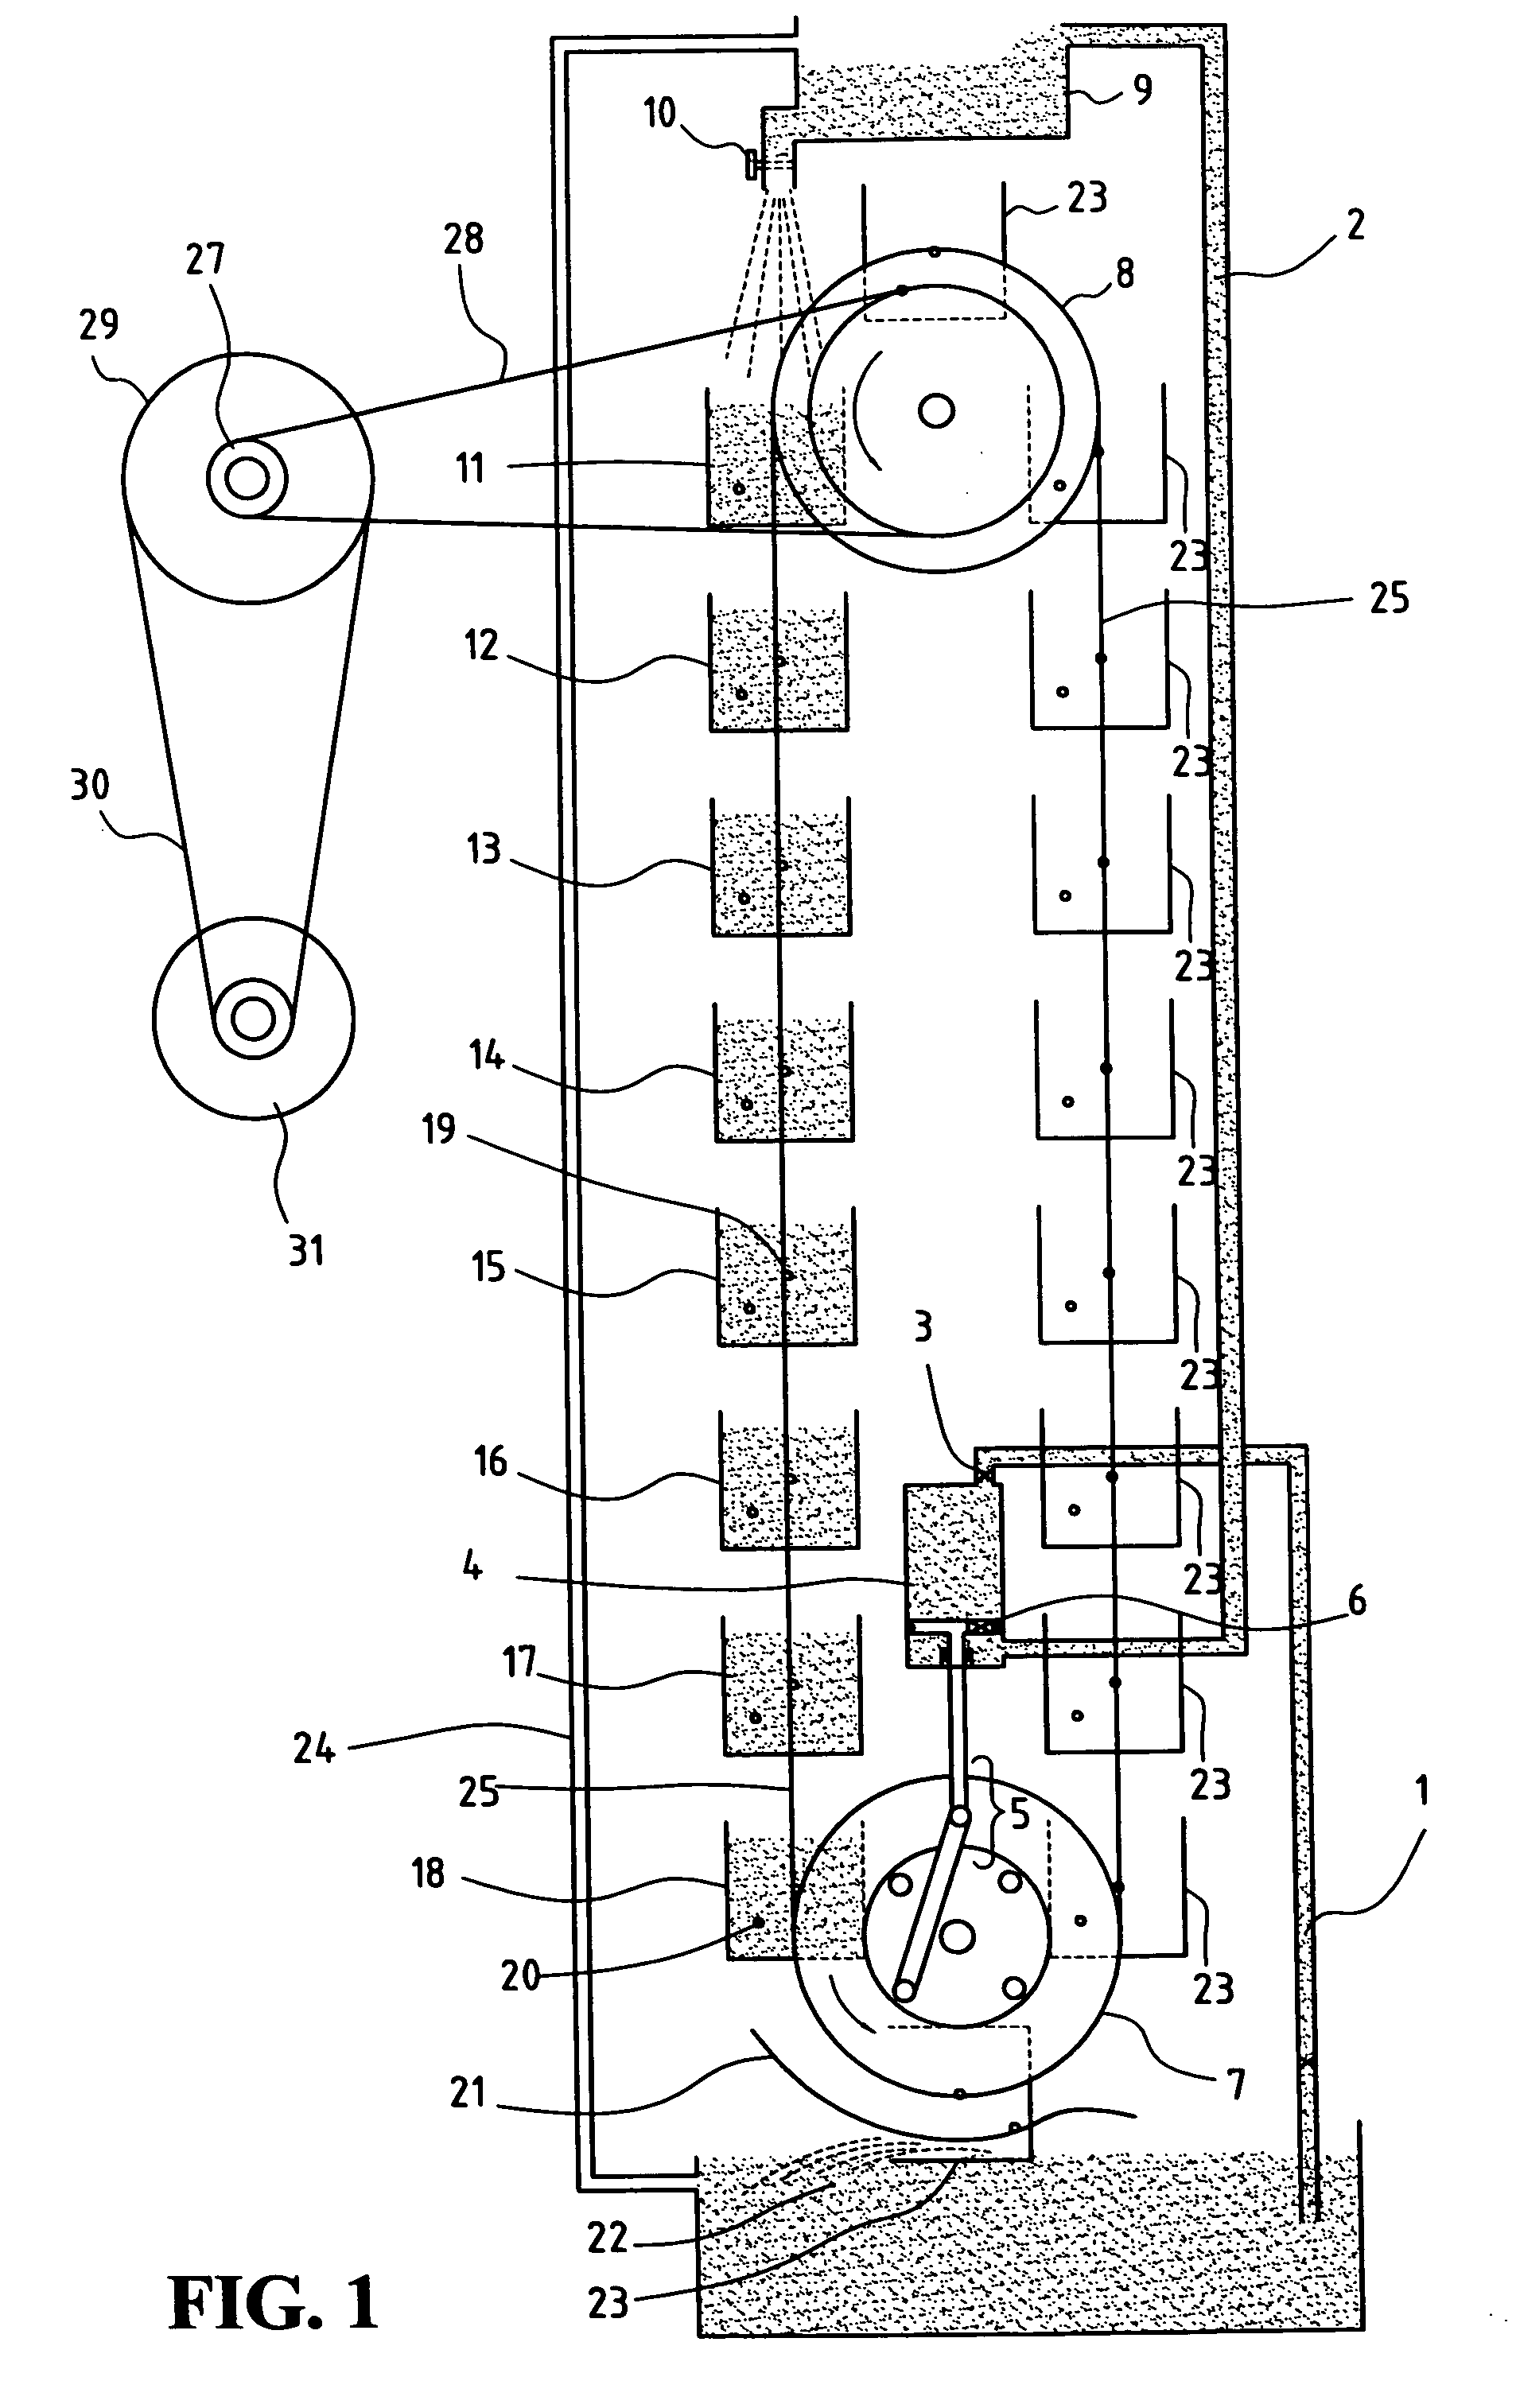 Hydraulic power generation system based on water pumping by weight of water